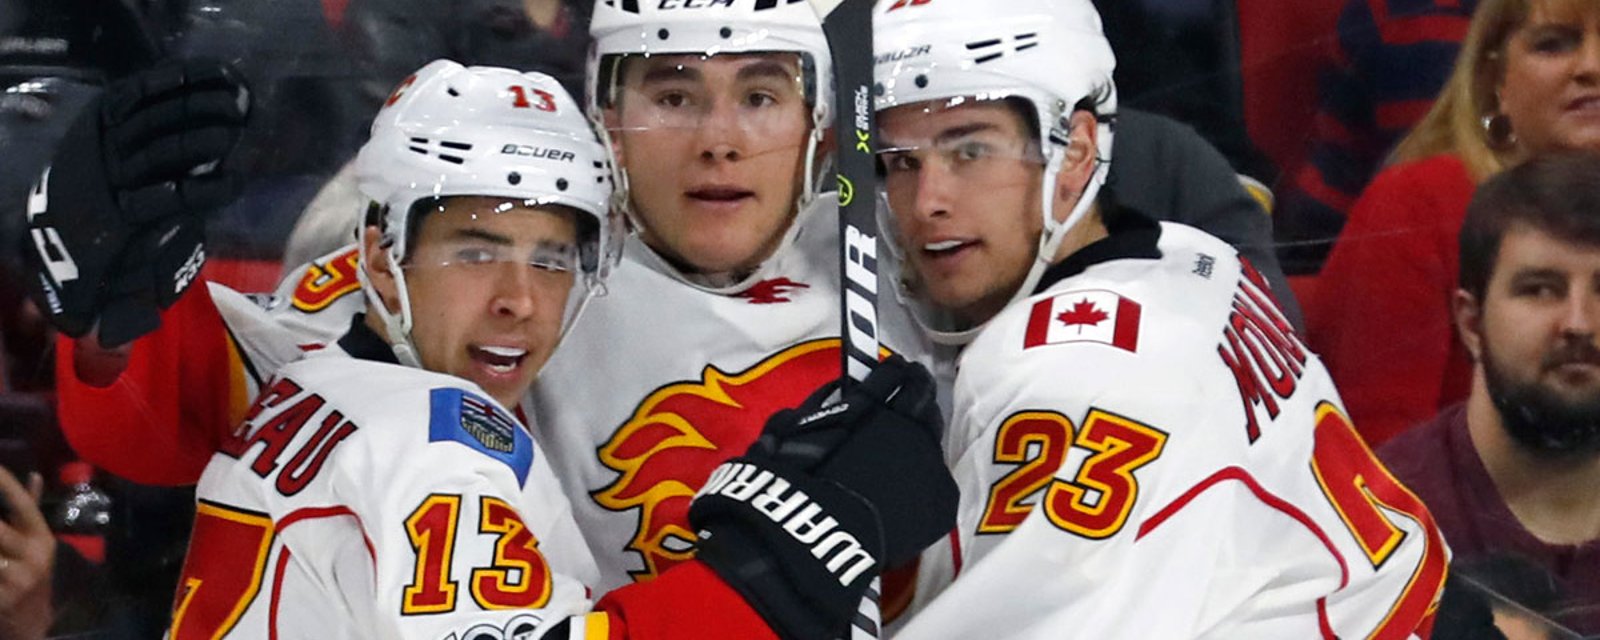 NHL coach saved Flames young star who struggled with alcoholism 